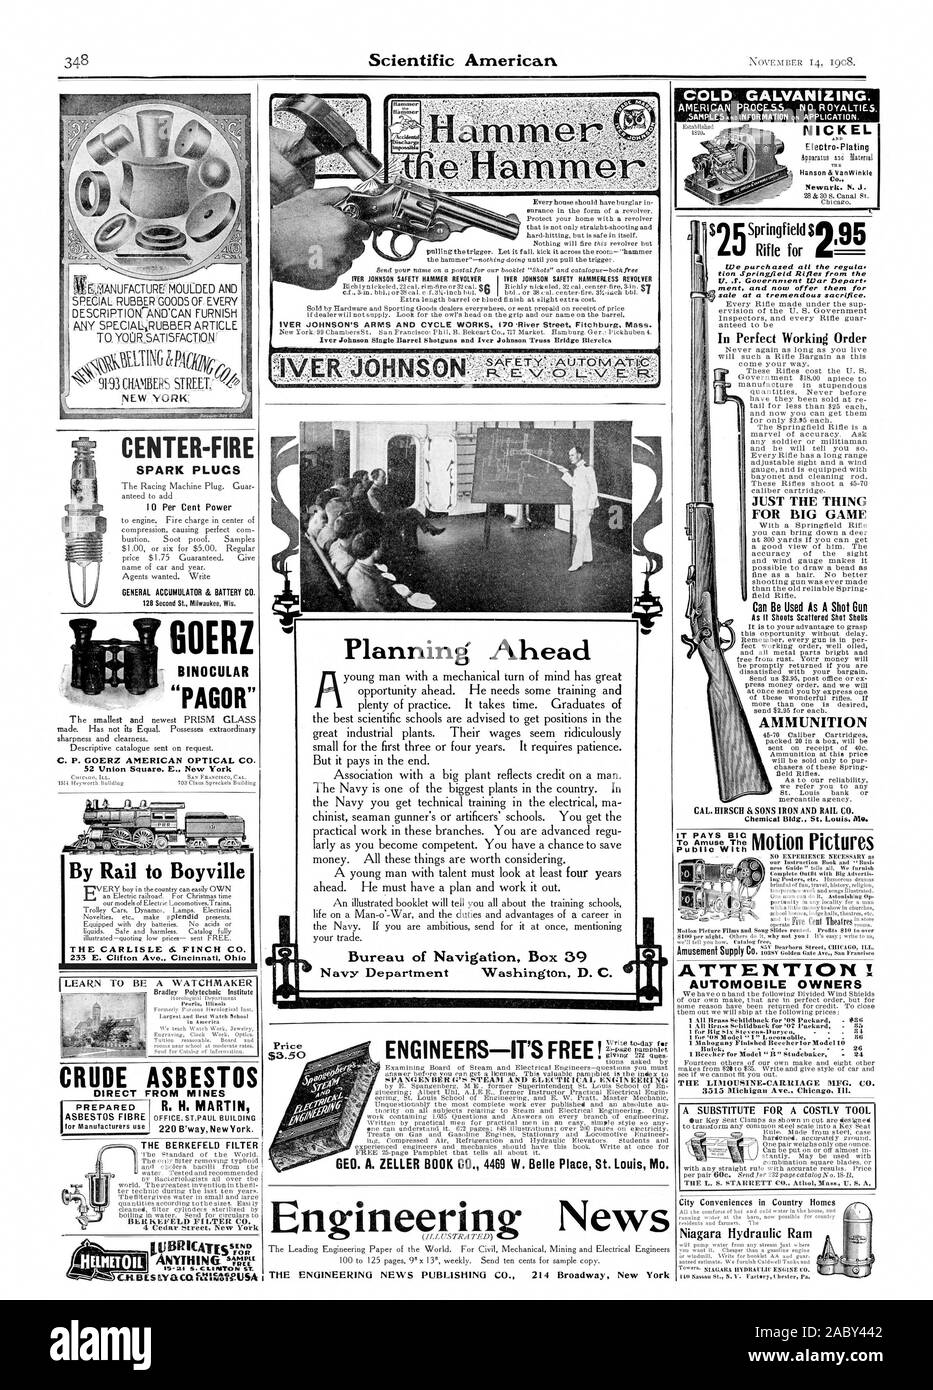 COLD GALVANIZING. $3.50 DER JOHNSON SAFETY HAMMER REVOLVER IVER JOHNSON SAFETY HAMMERLESS REVOLVER Ld Rifle for We purchased ail the regula. tion Springfield Rifles from the ment and now offer them for sale at a tremendous sacrifice. In Perfect Working Order JUST THE THING FOR BIG GAME CENTER-FIRE SPARK PLUGS GENERAL ACCUMULATOR & BATTERY CO. GOERZ — BINOCULAR 'PAGOR' C. P. GOERZ AMERICAN OPTICAL CO. By Rail to Boyville 233 E. Clifton Ave. Cincinnati Ohi CRUDE ASBESTOS DIRECT FROM MINES R. H. MARTIN THE BERKEFELD FILTER BERKEEELD FILTER CO. 4 Cedar Street New York Planning Ahead Bureau of Stock Photo